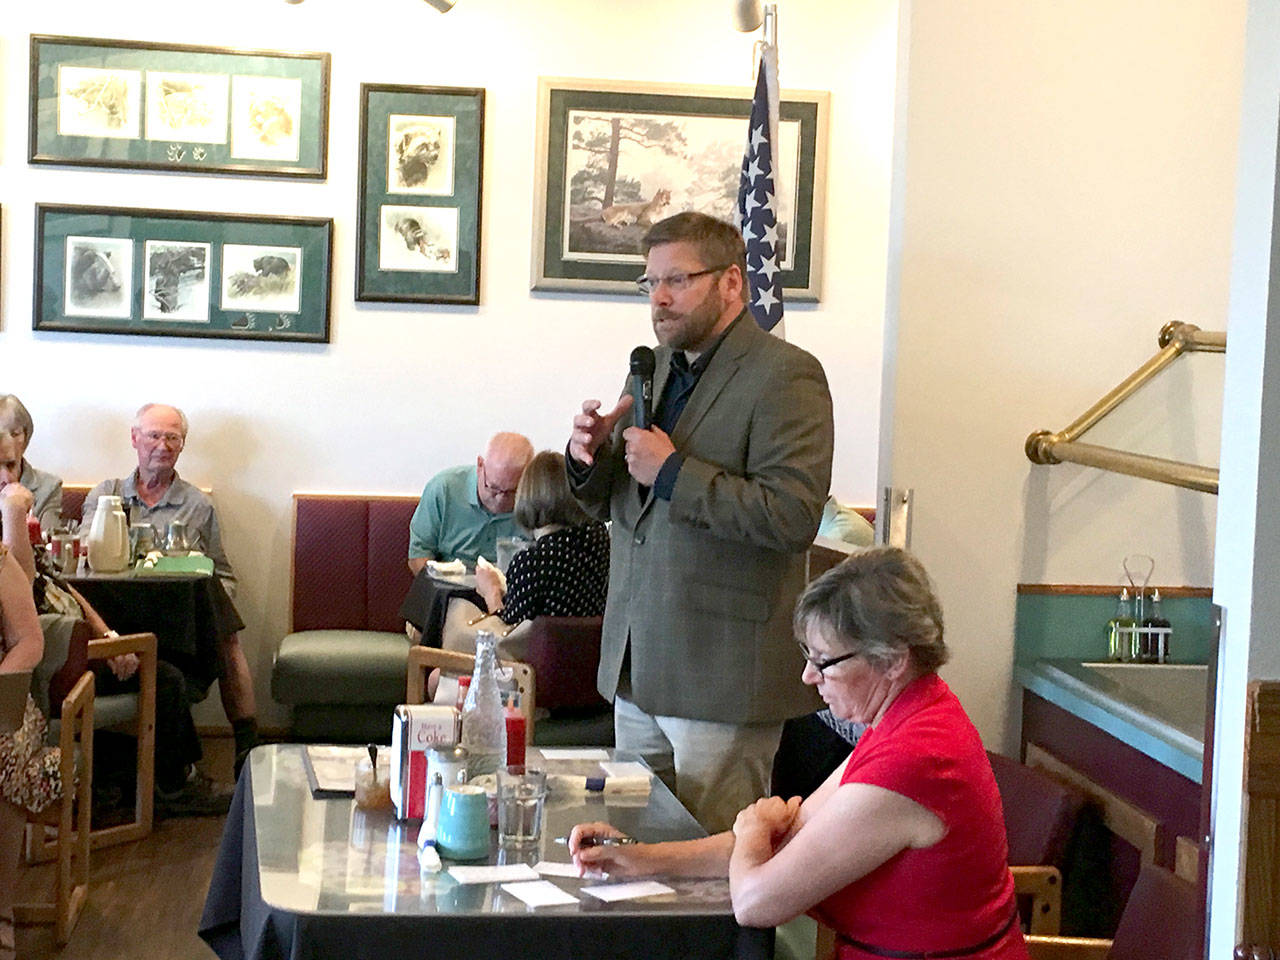 State Rep. Mike Chapman speaks at a candidate’s forum at Joshua’s Restaurant in Port Angeles on Tuesday. Chapman, D-Port Angeles, is running against Port Townsend Republican Jodi Wilke, seated, in the November election. (Rob Ollikainen/Peninsula Daily News)